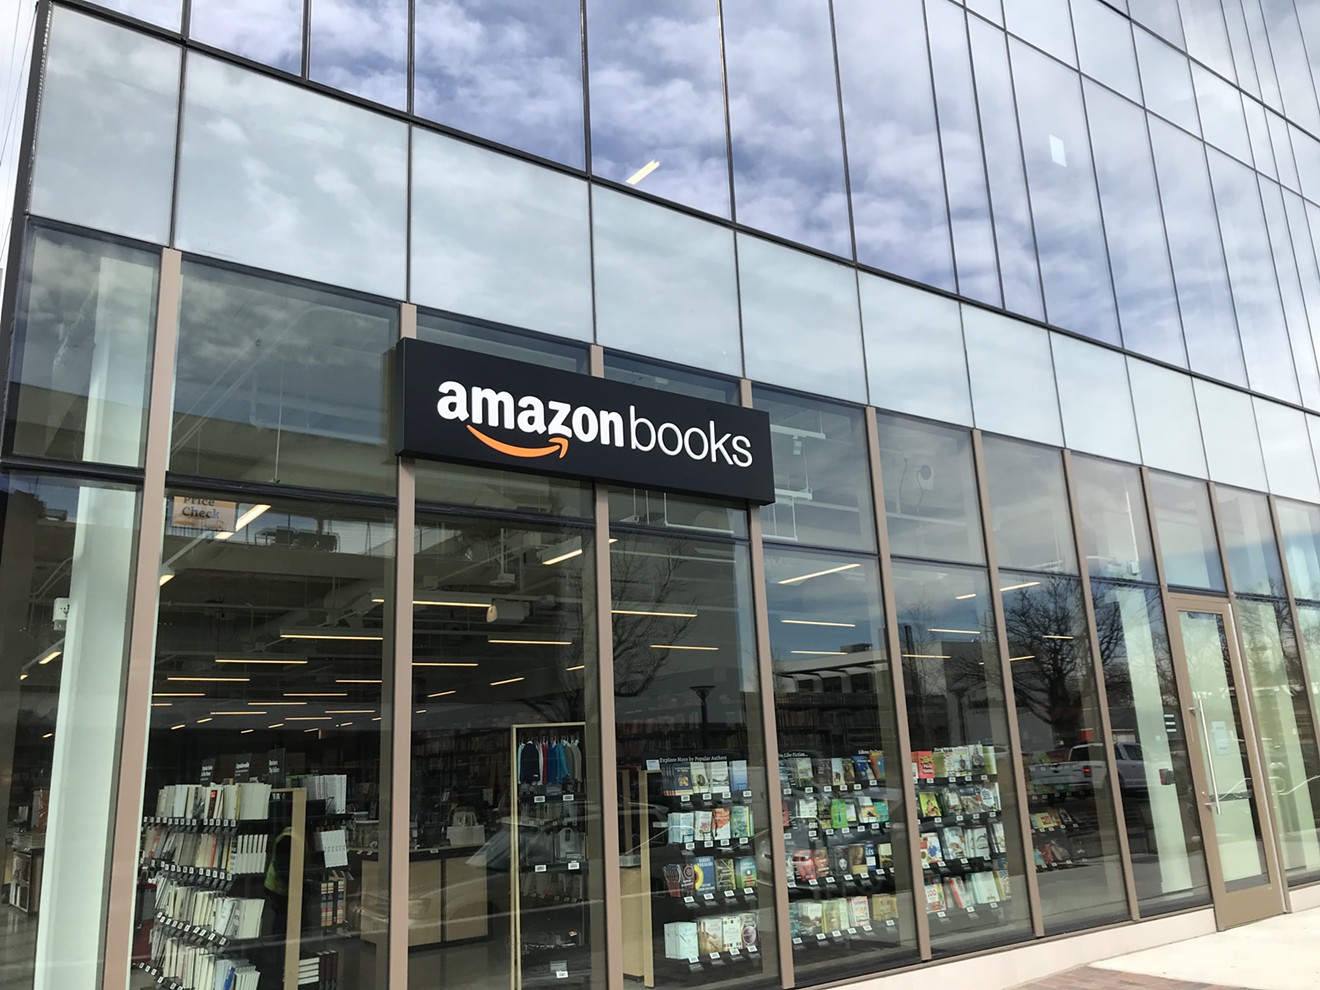 Amazon Books opened March 6 in Cherry Creek North.